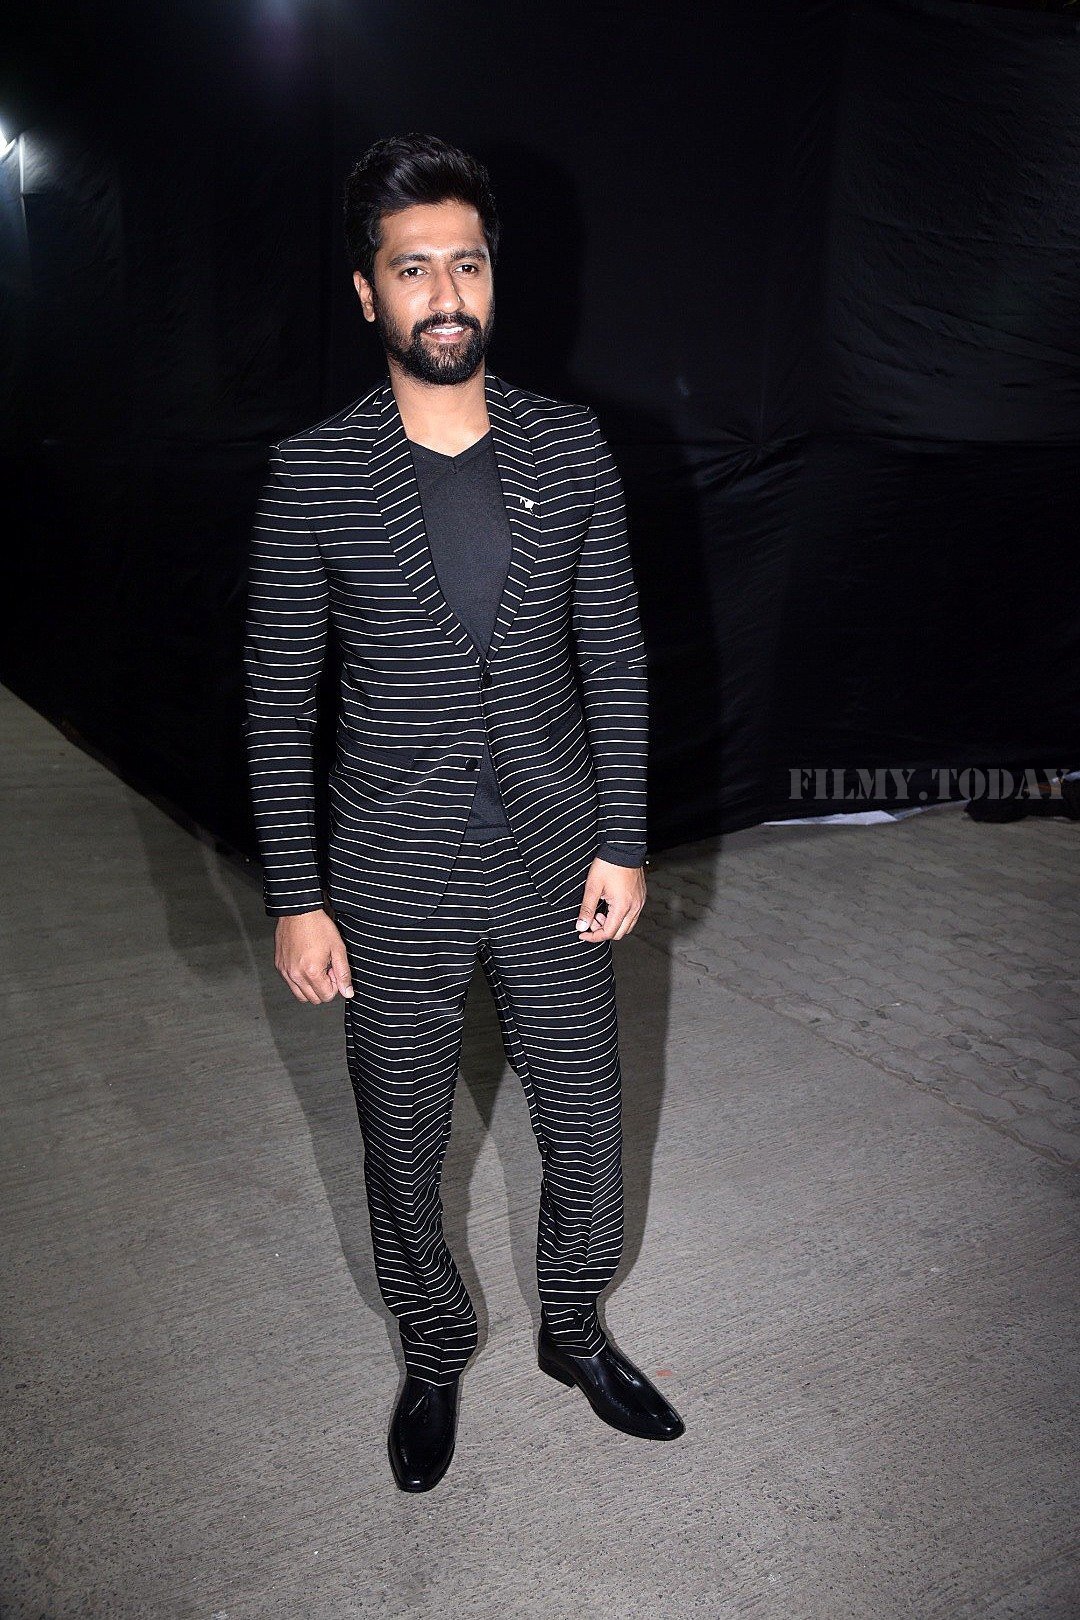 Photos: Vicky Kaushal At Times Fresh Face Grand Finale | Picture 1633134